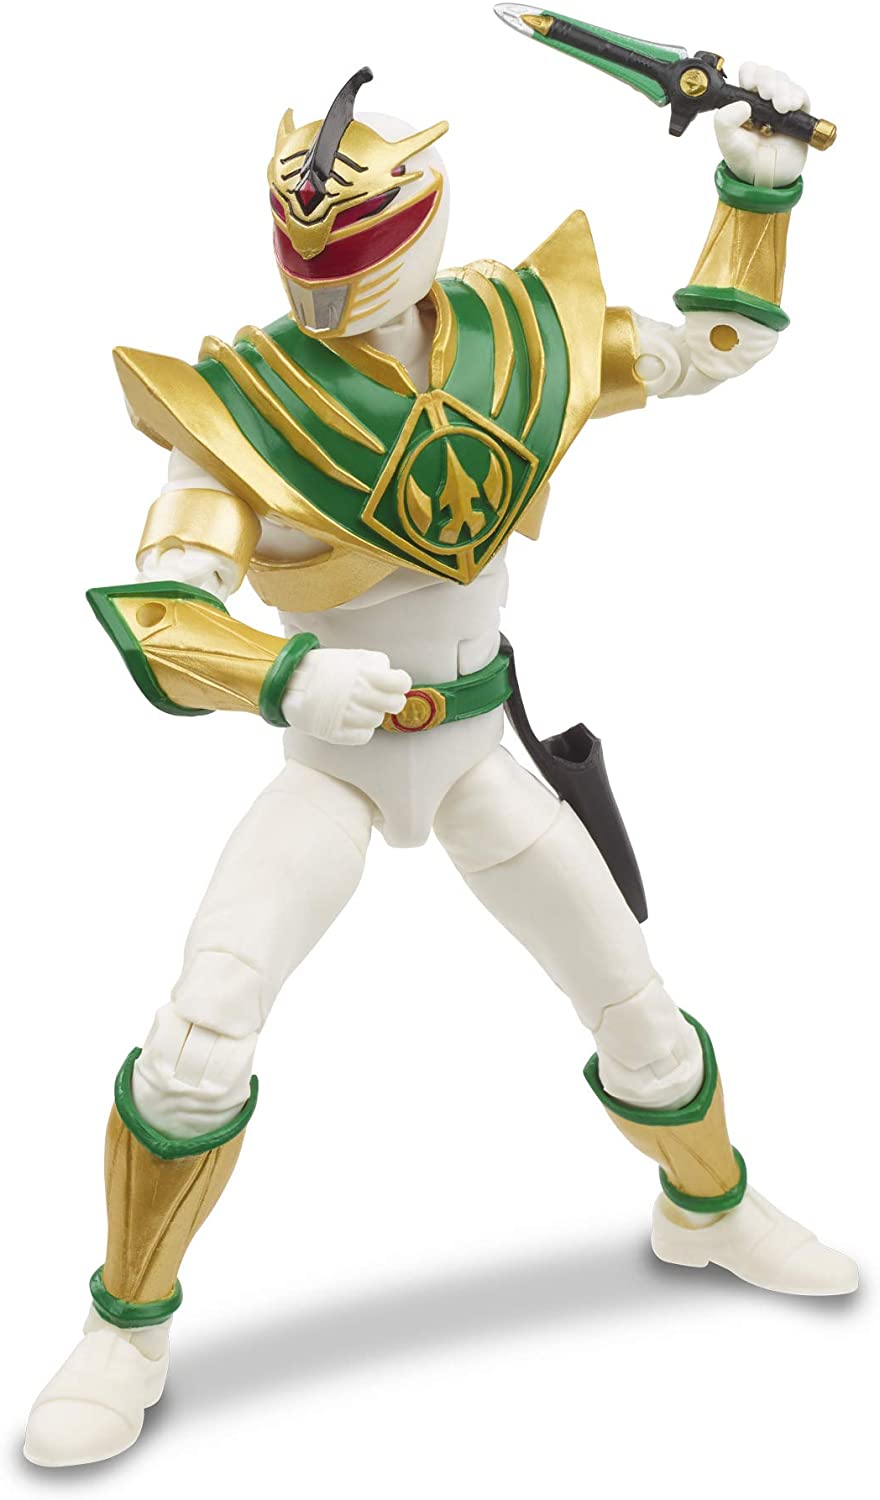 Power Rangers 6 Inch Action Figure - Lightning Collection - Mighty Morphin: Lord Drakkon